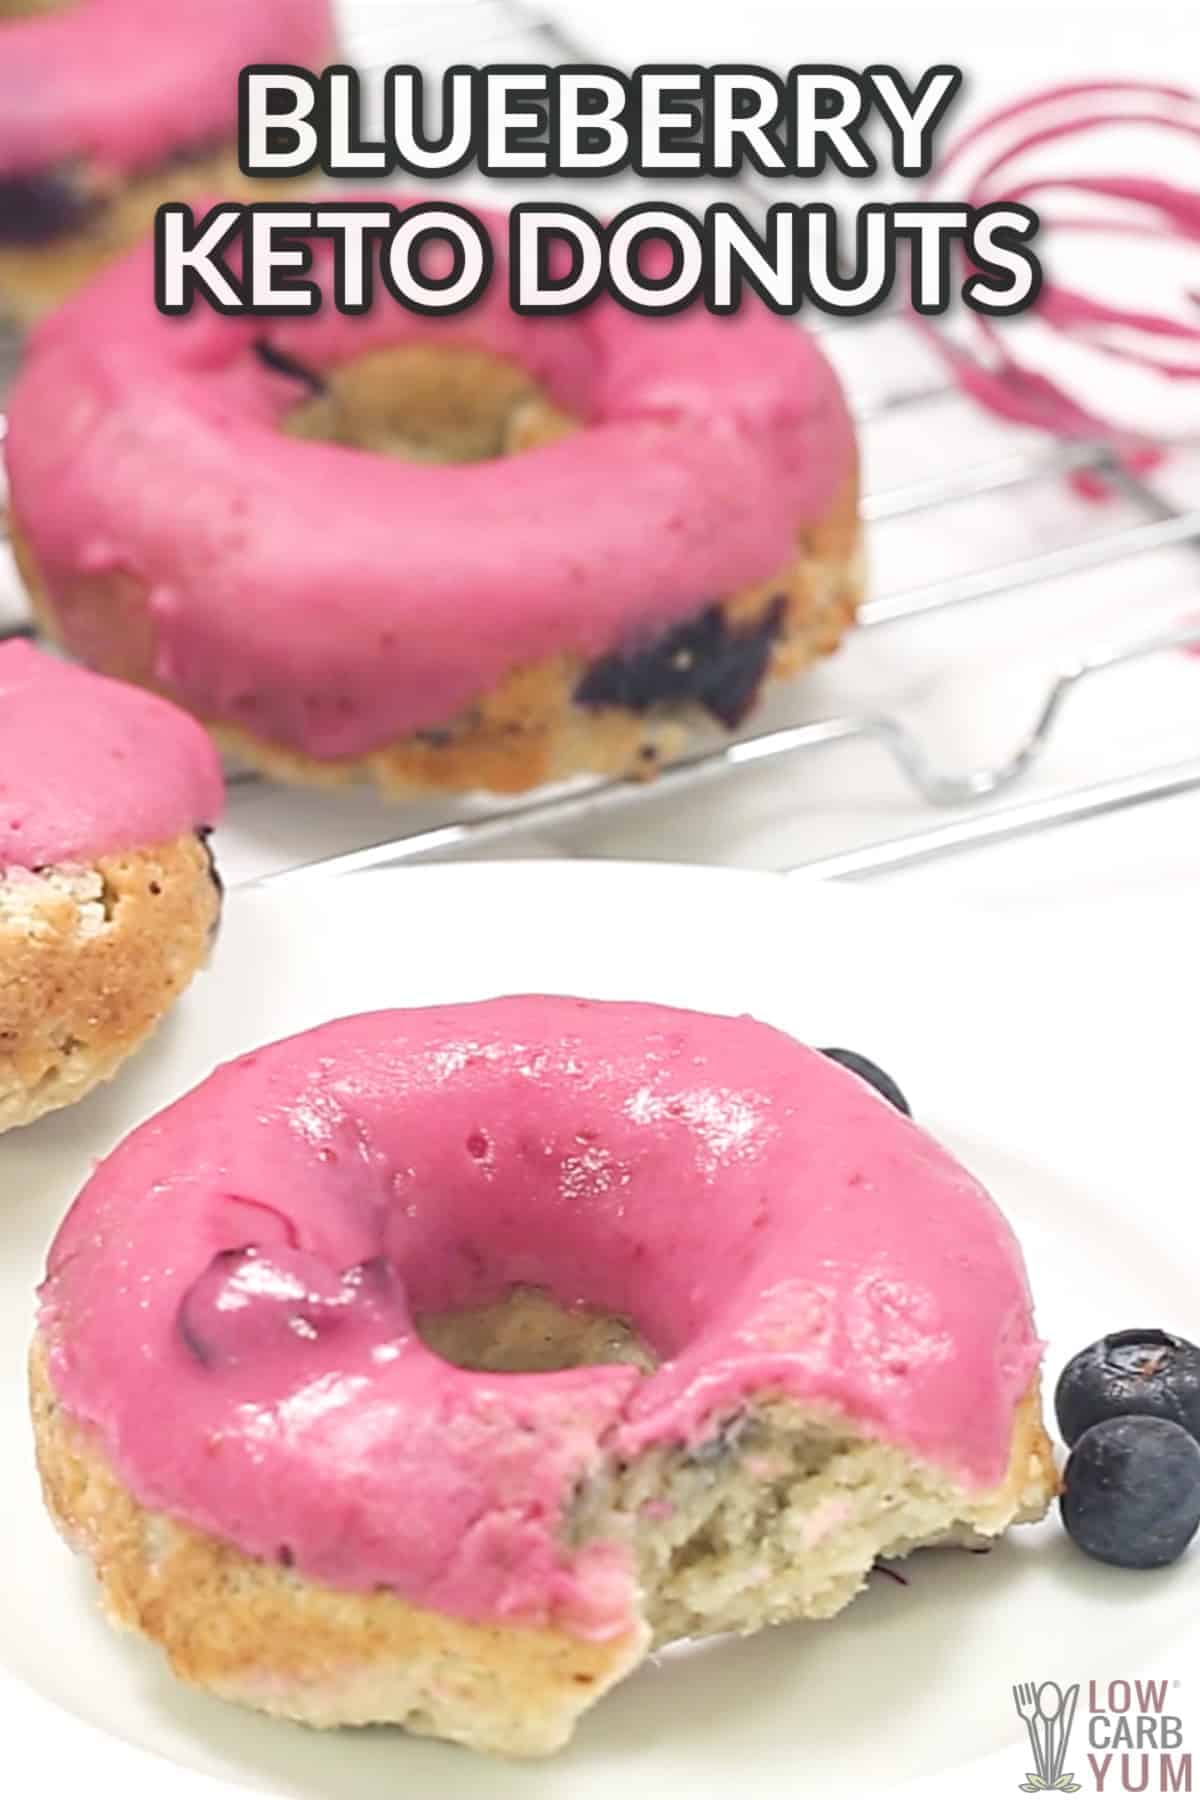 blueberry keto donuts with text overlay.